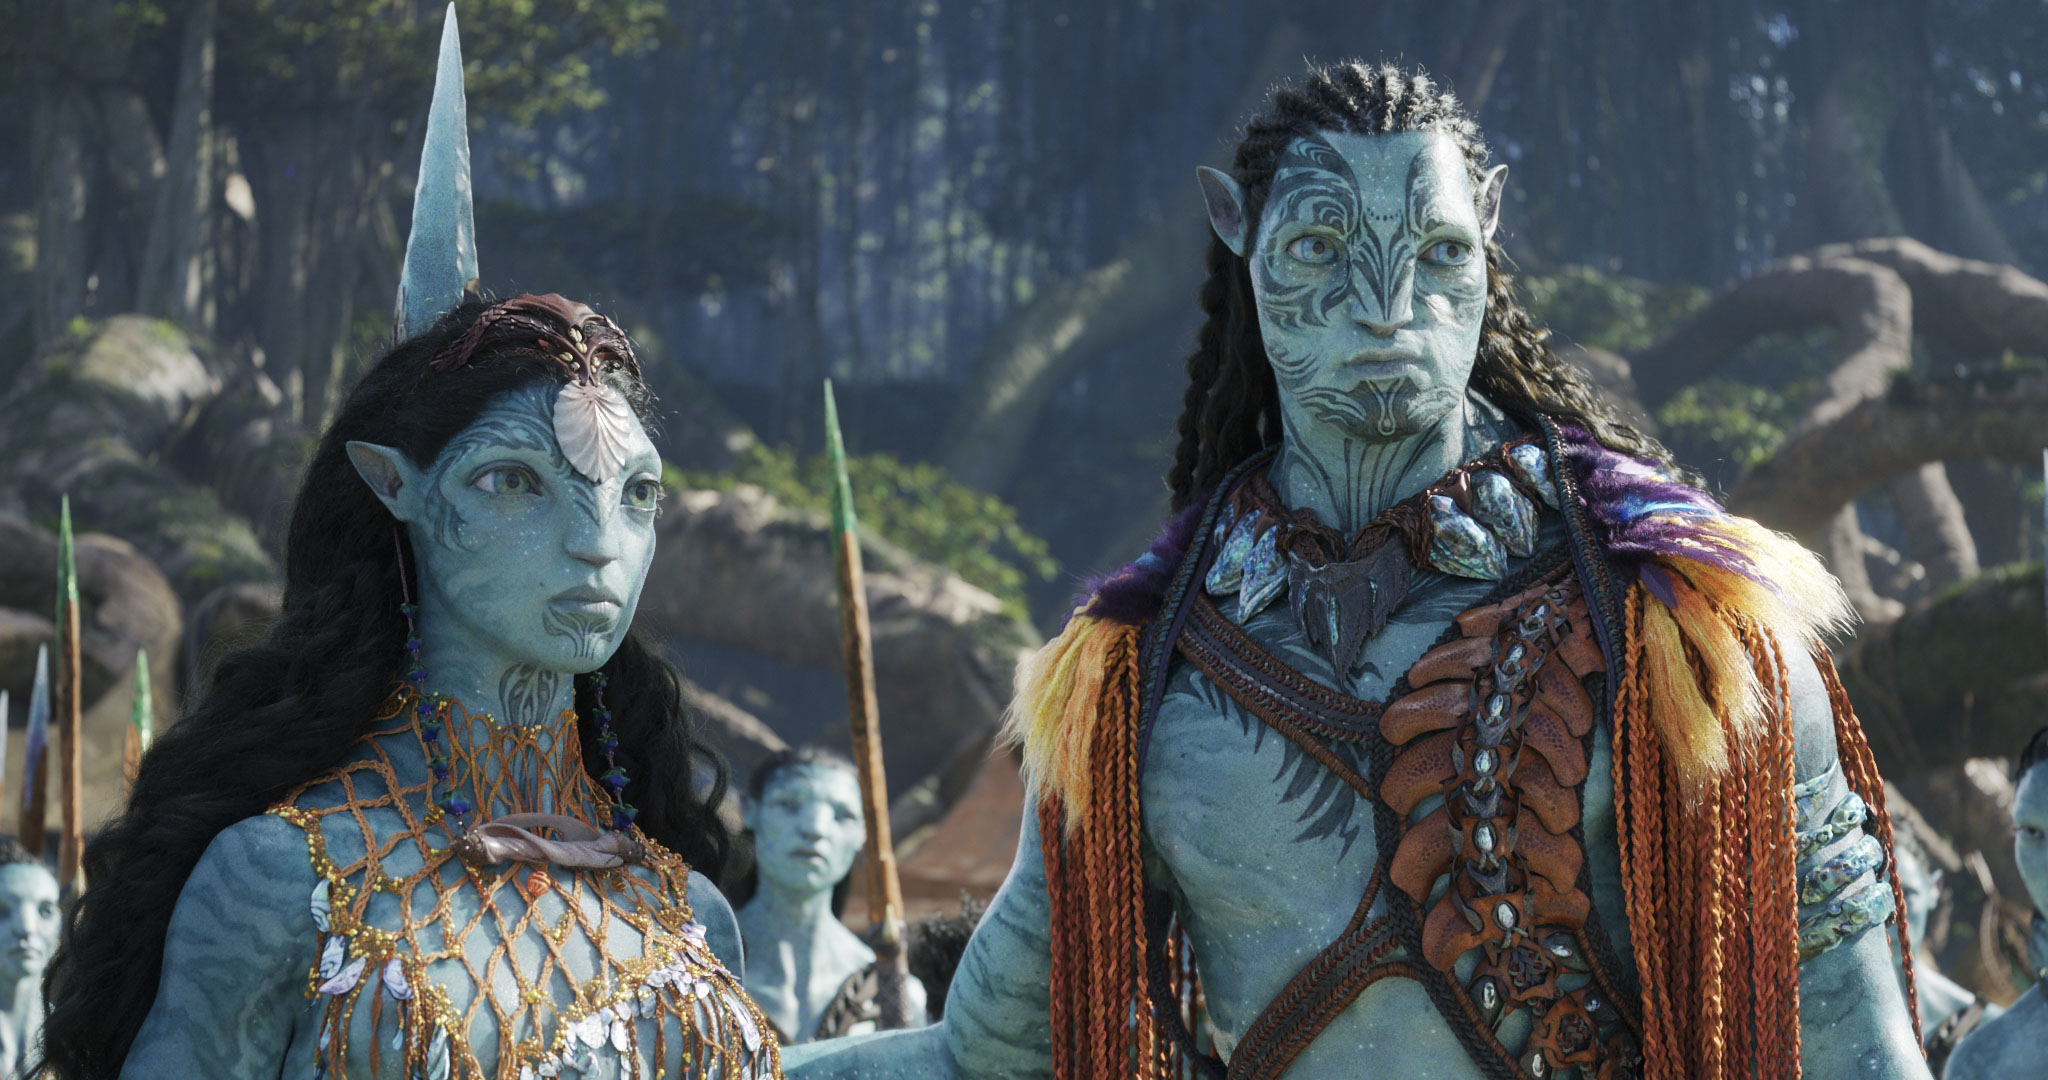 Avatar The Way of Water  Movie session times  tickets in New Zealand  cinemas  Flicks